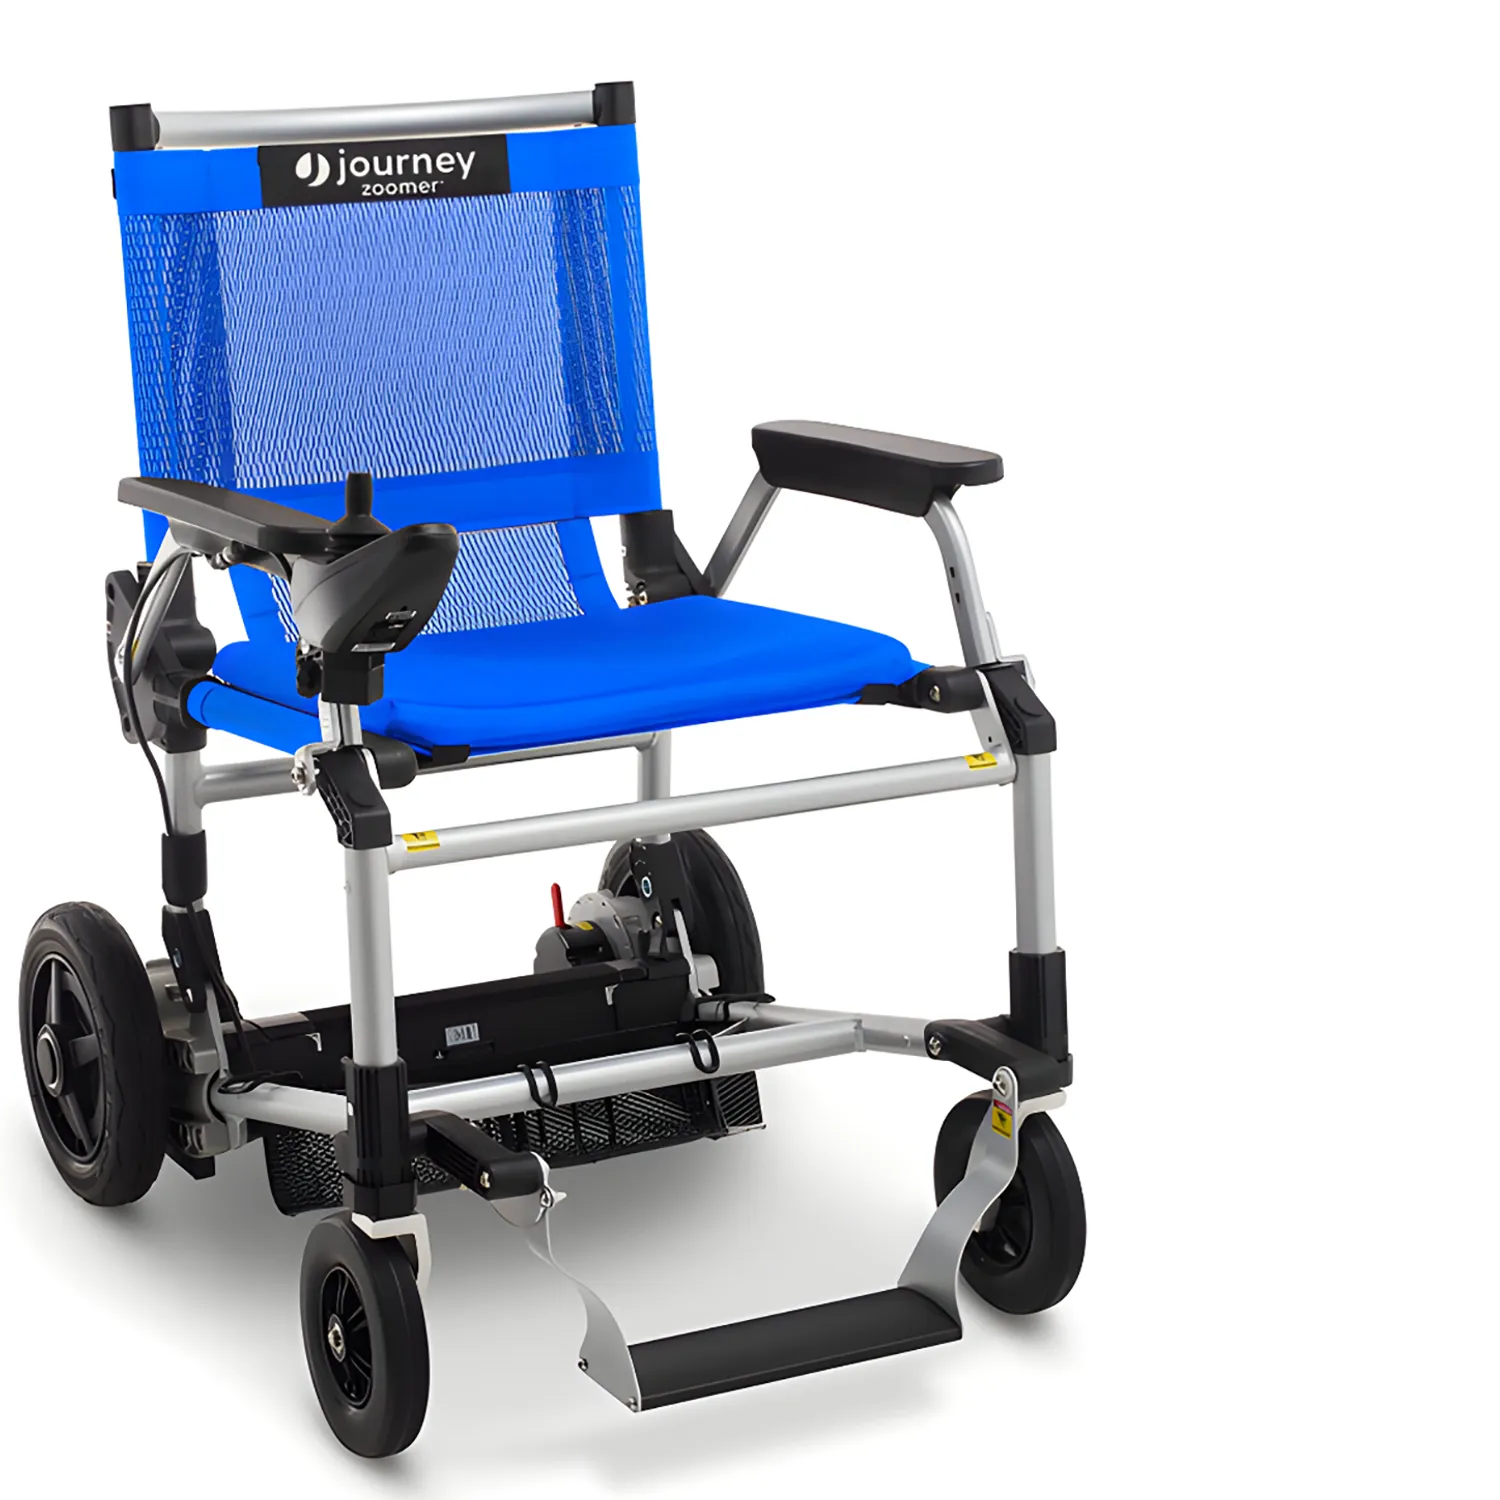 Journey Zoomer Folding Power Chair Power wheelchairs Journey Blue Right-handed Joystick 